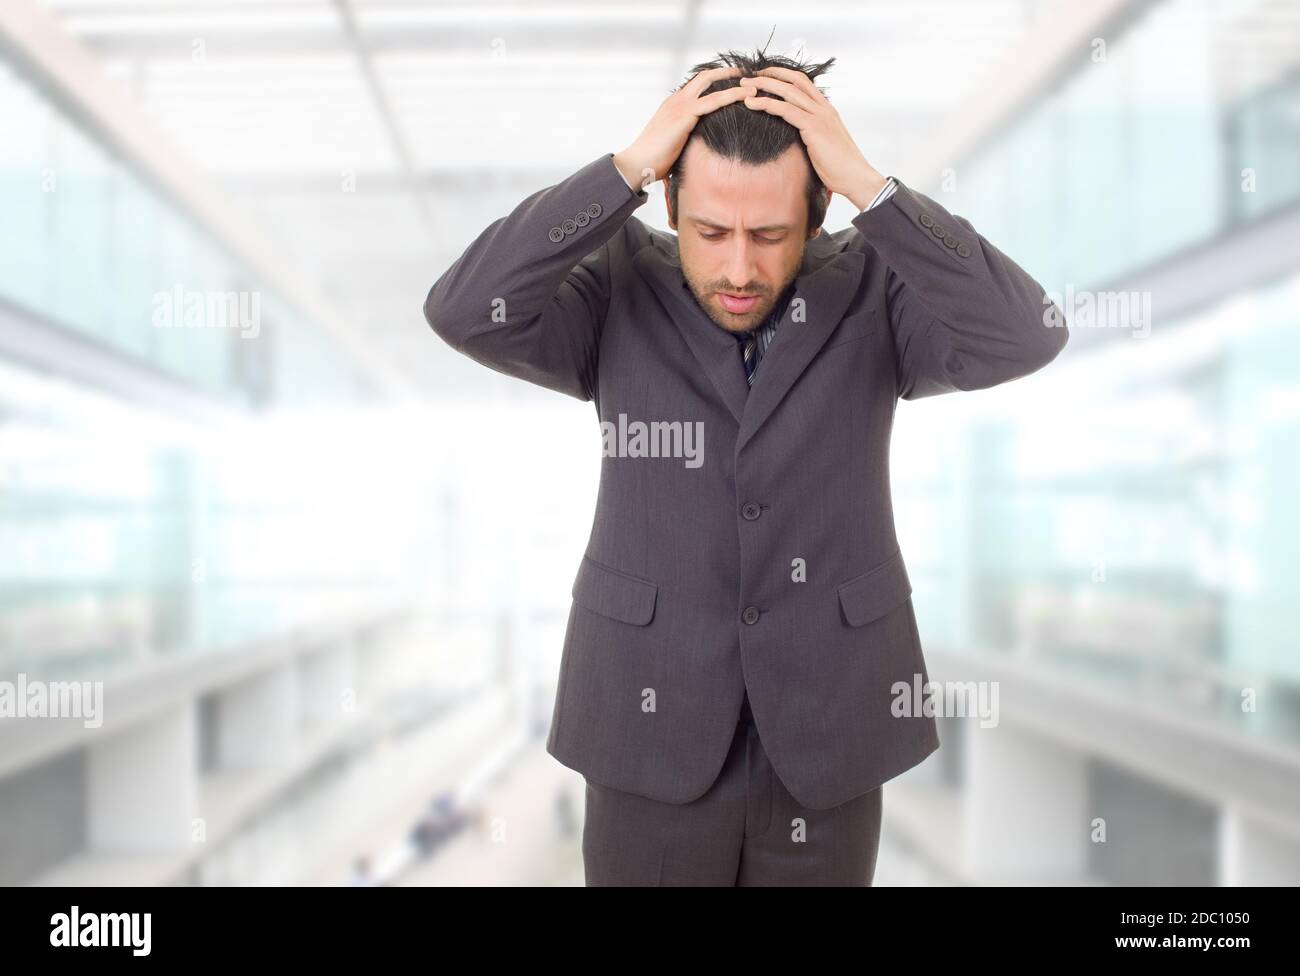 Businessman in a suit gestures with a headache, at the office Stock Photo